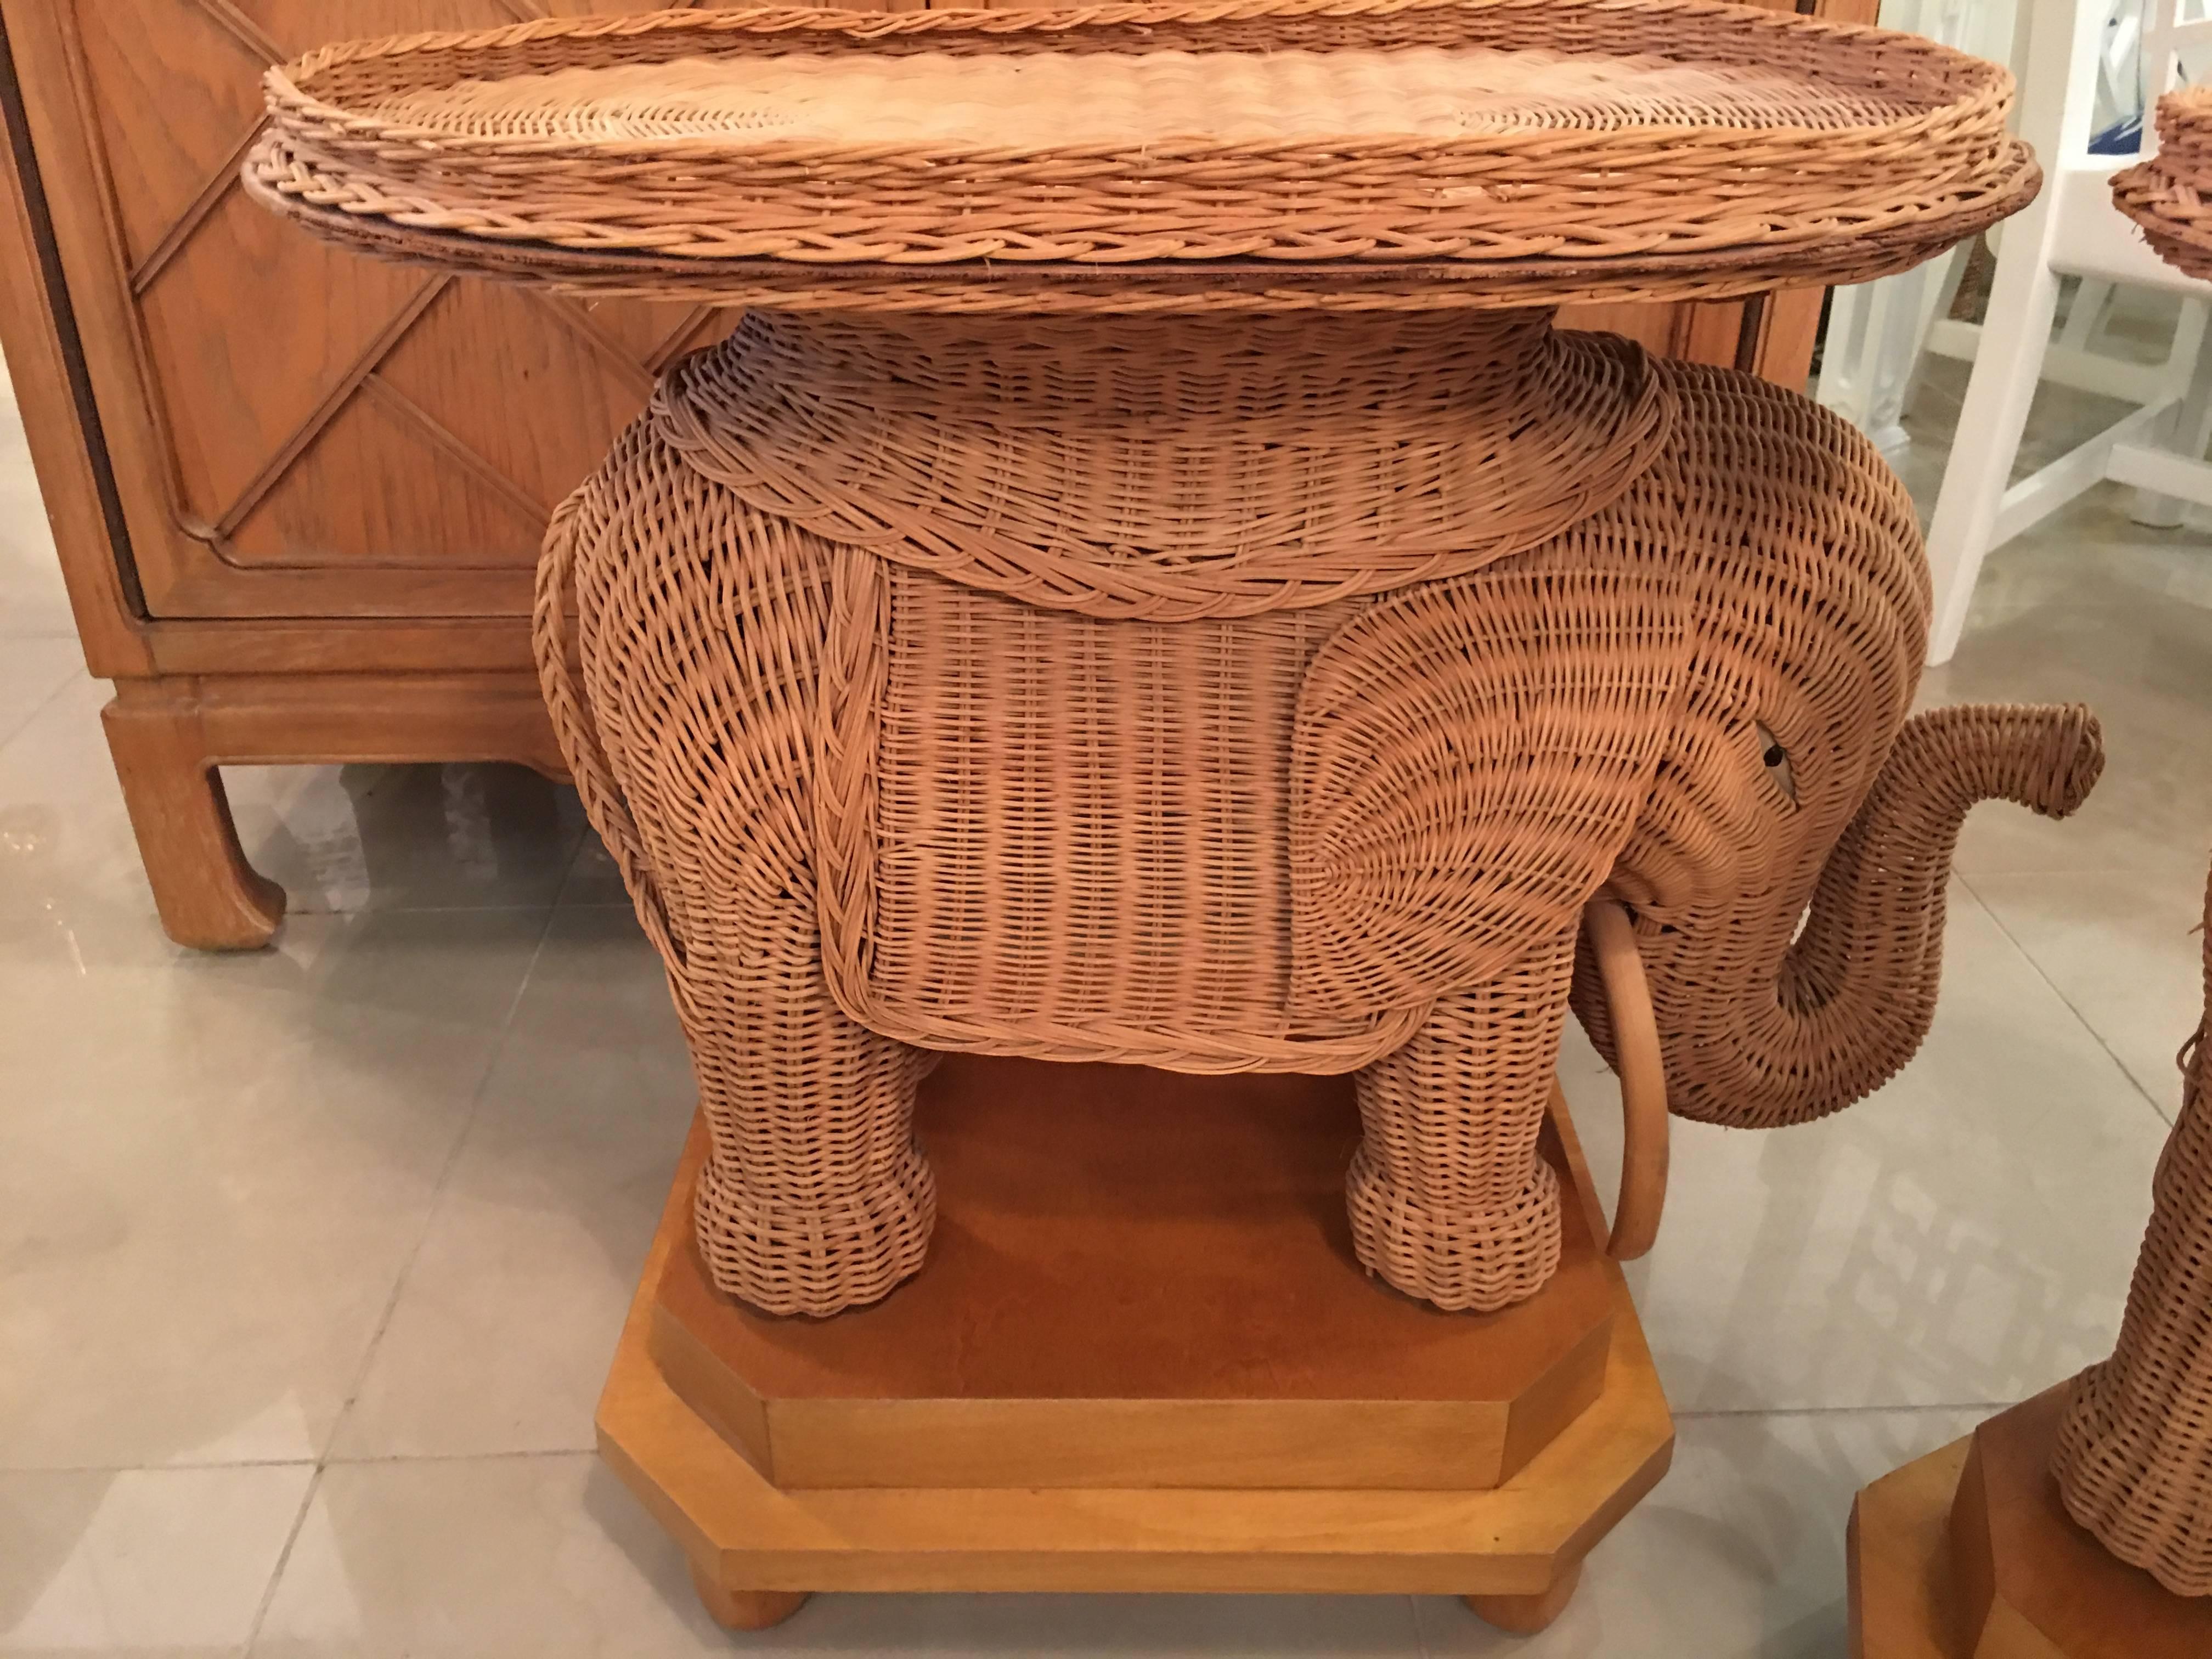 Such an amazing pair of vintage wicker garden elephant stand, stools, side or end tables. The top wicker tray, table tops are removable (pictured).